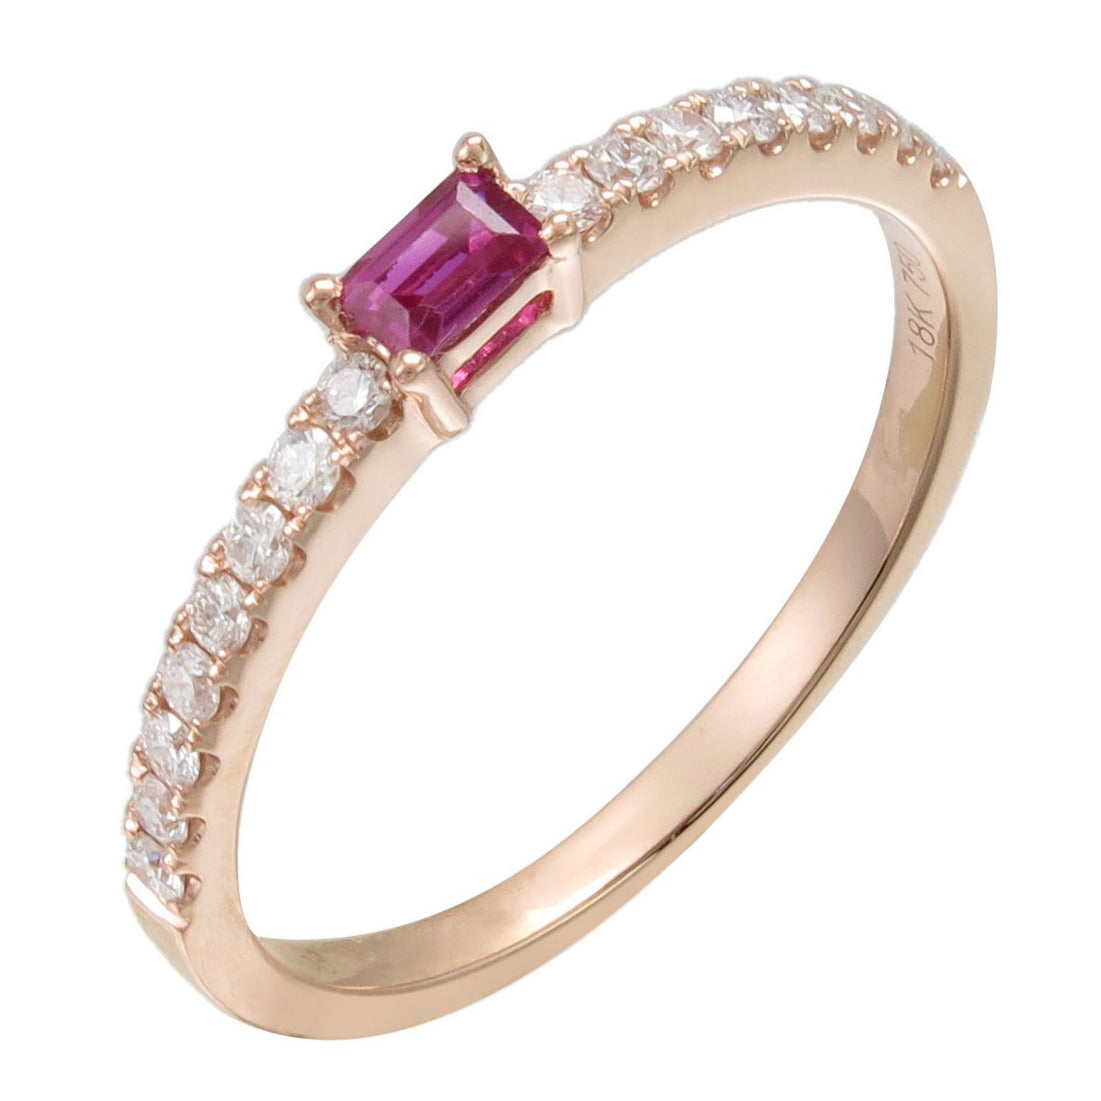 0.32carat Ruby & Diamond Stackable Ring